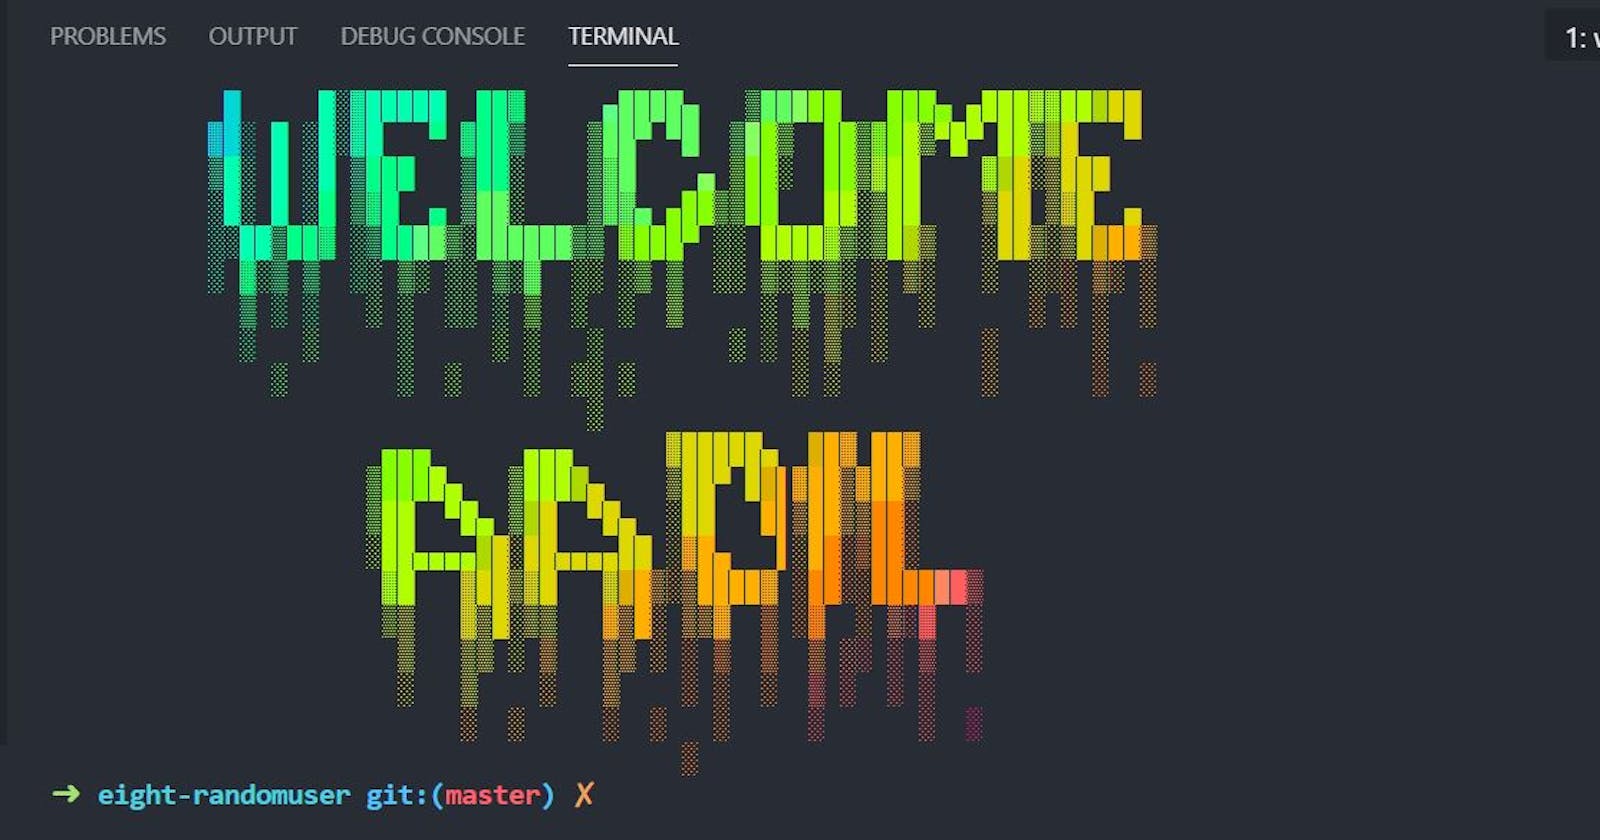 How to get a welcome message in VS Code while using zsh?